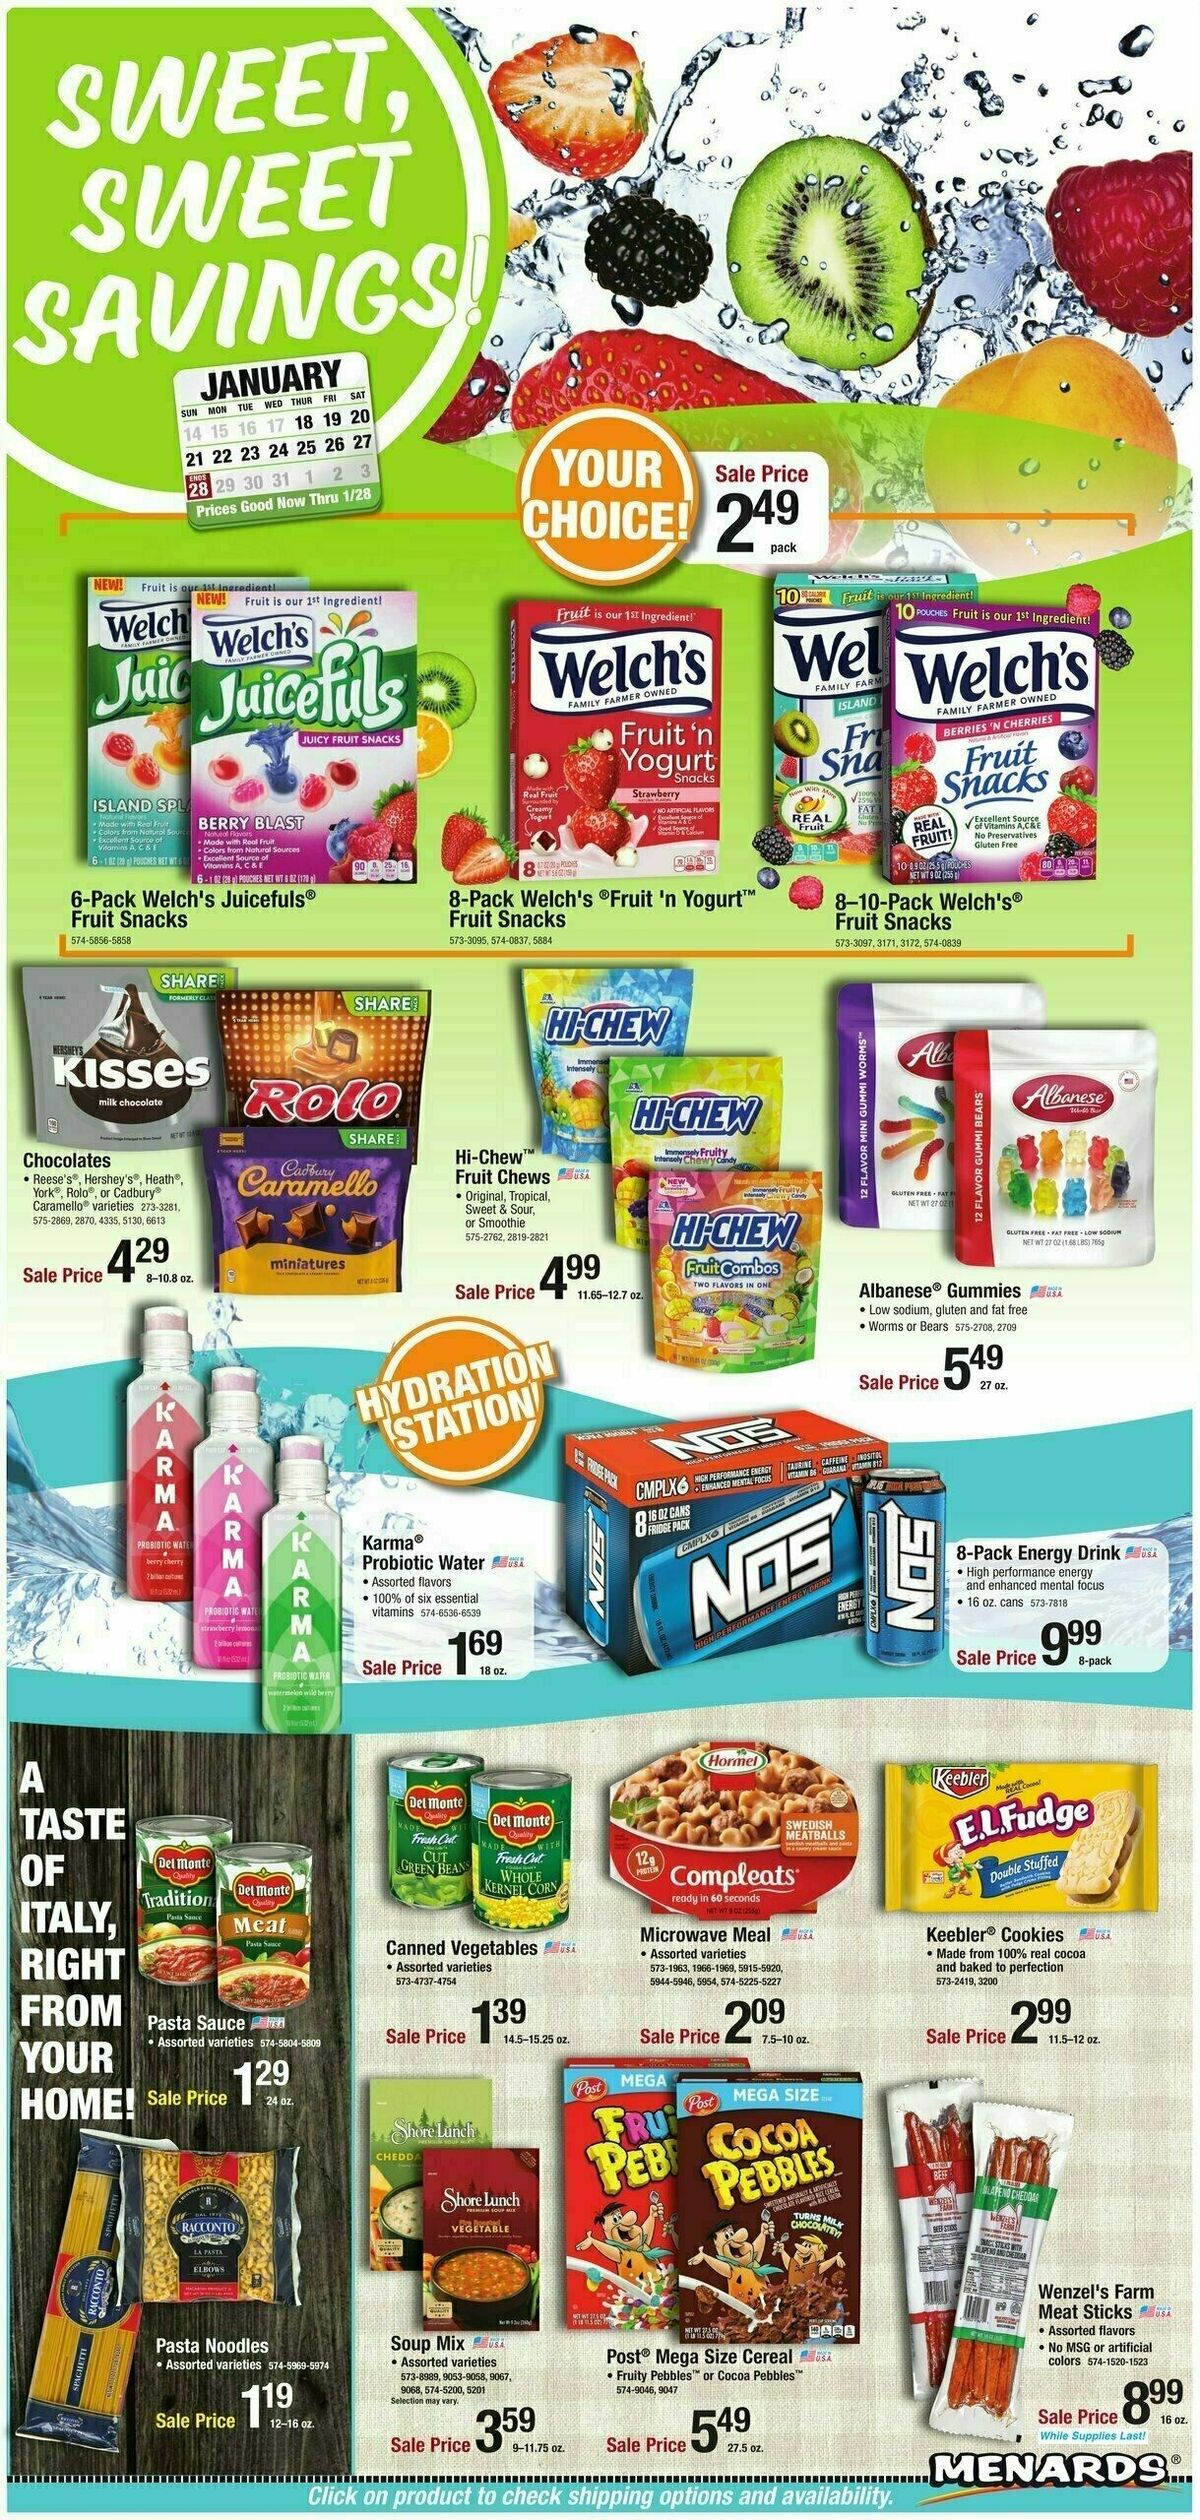 Menards Home Essentials Weekly Ad from January 17